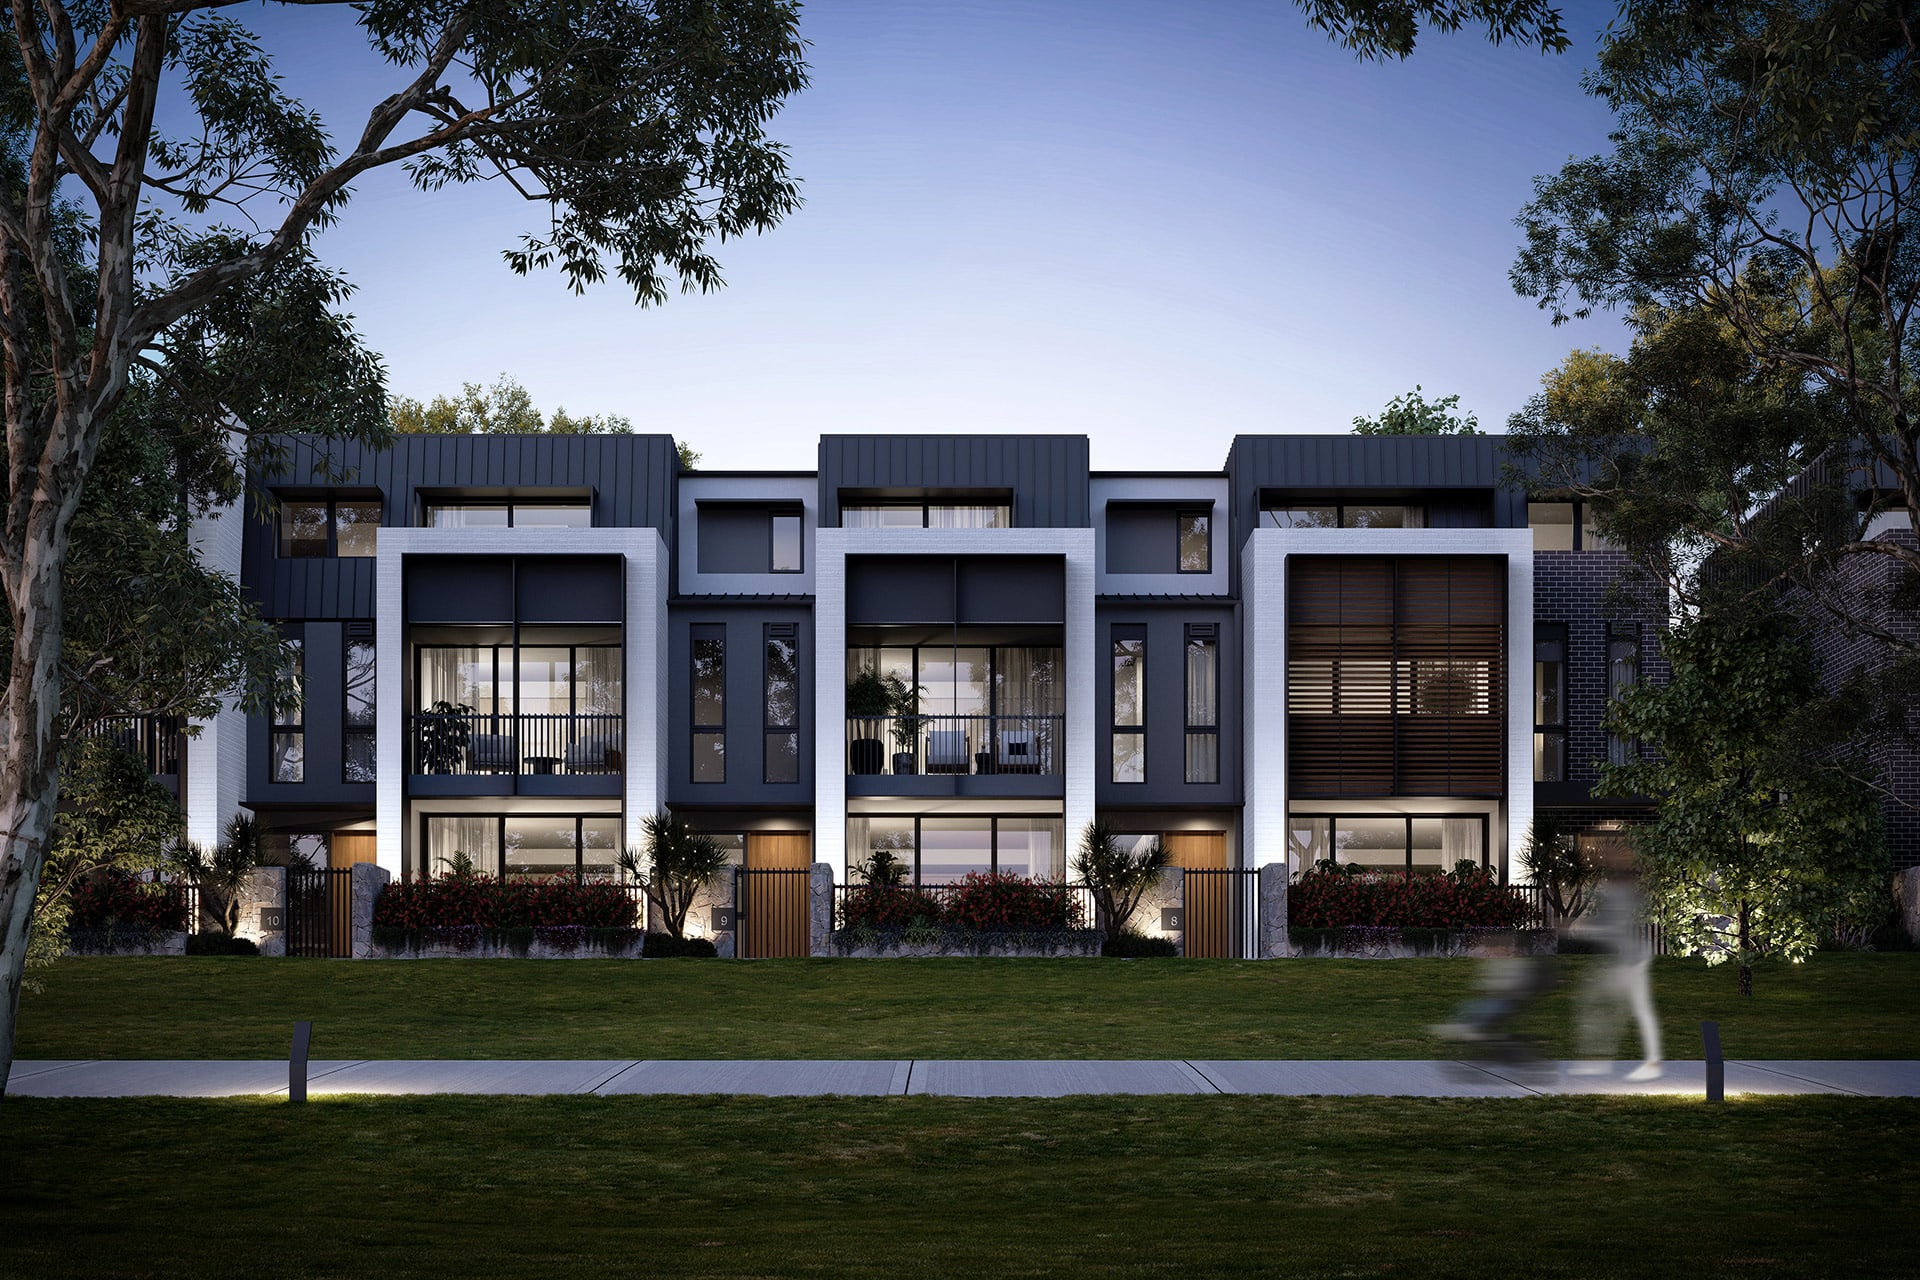 Tian An brings rare townhouse development to Henley Park in Enfield